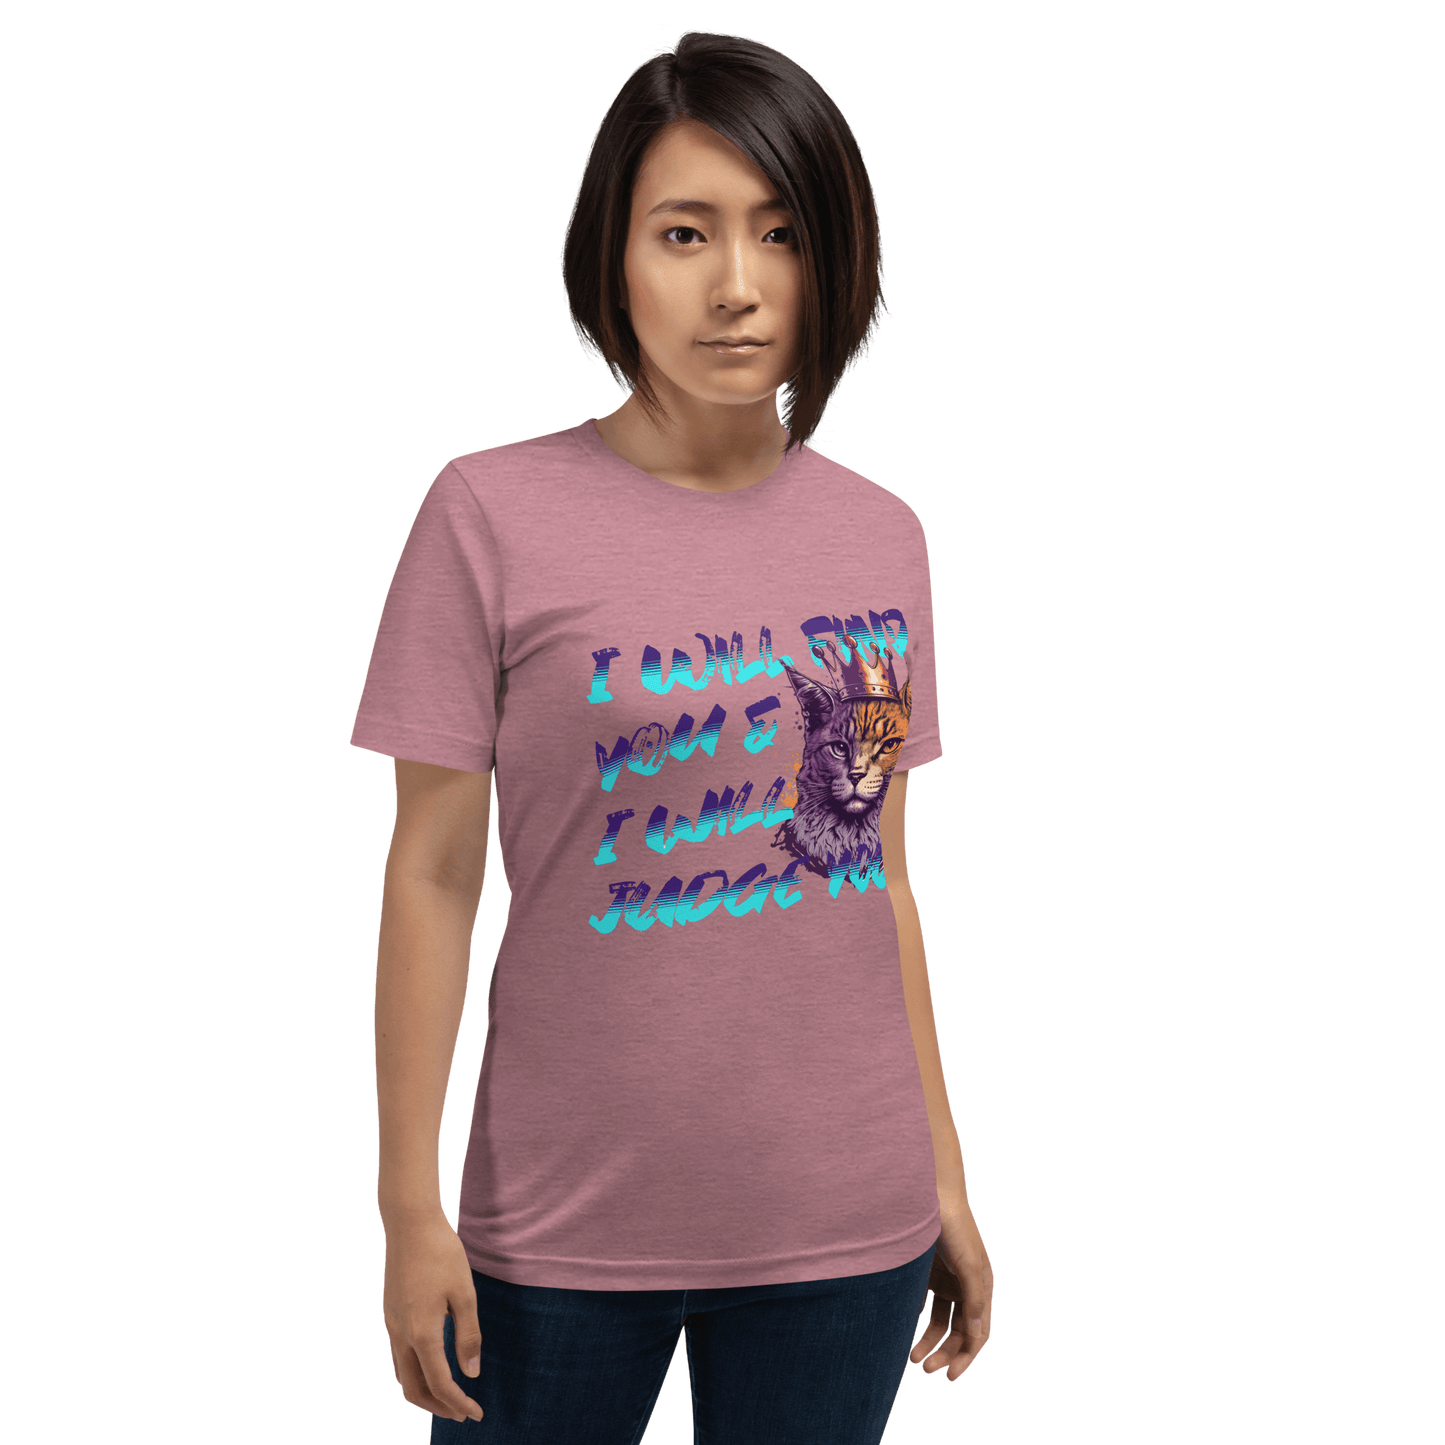 I Will Find You & I Will Judge You Crew Neck T-Shirt - Pet Pride Tees